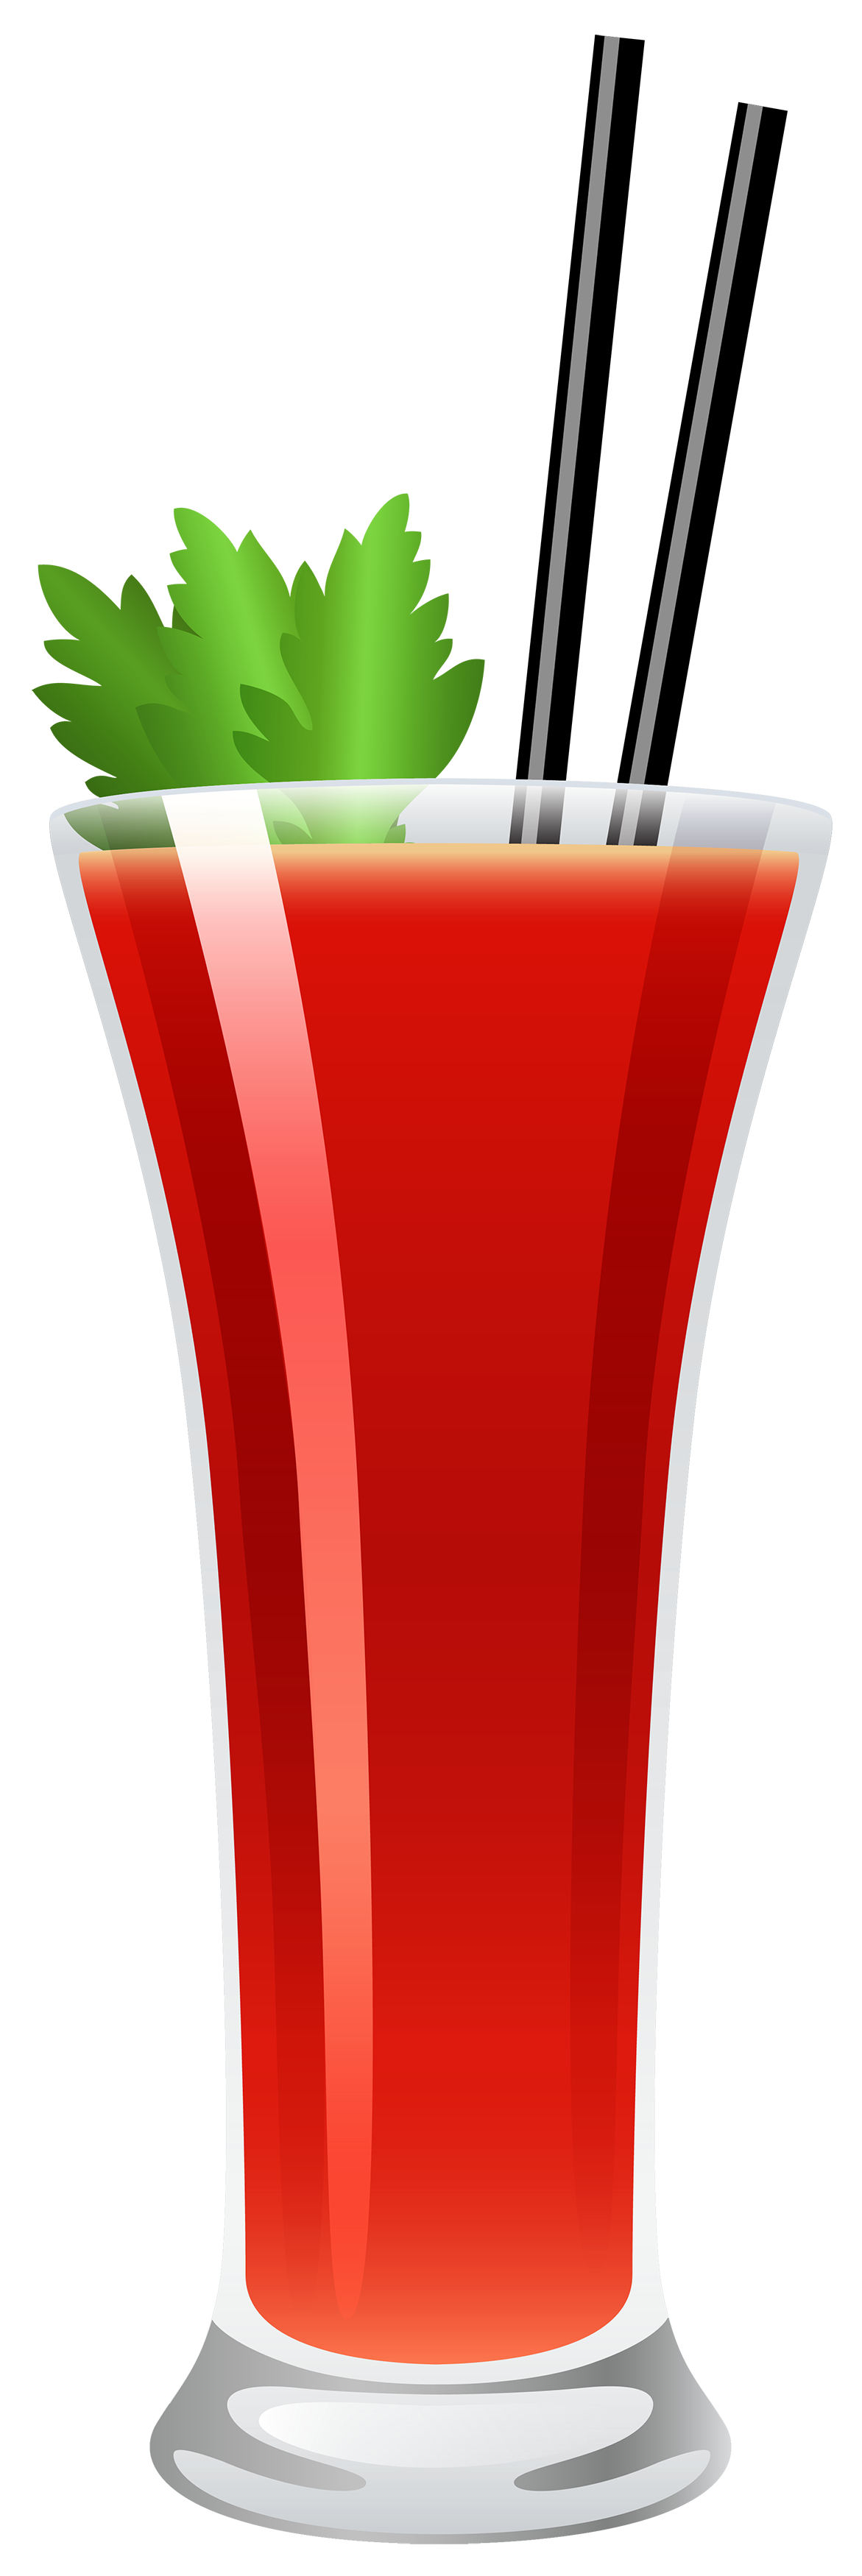 bloody mary drink clipart - photo #3